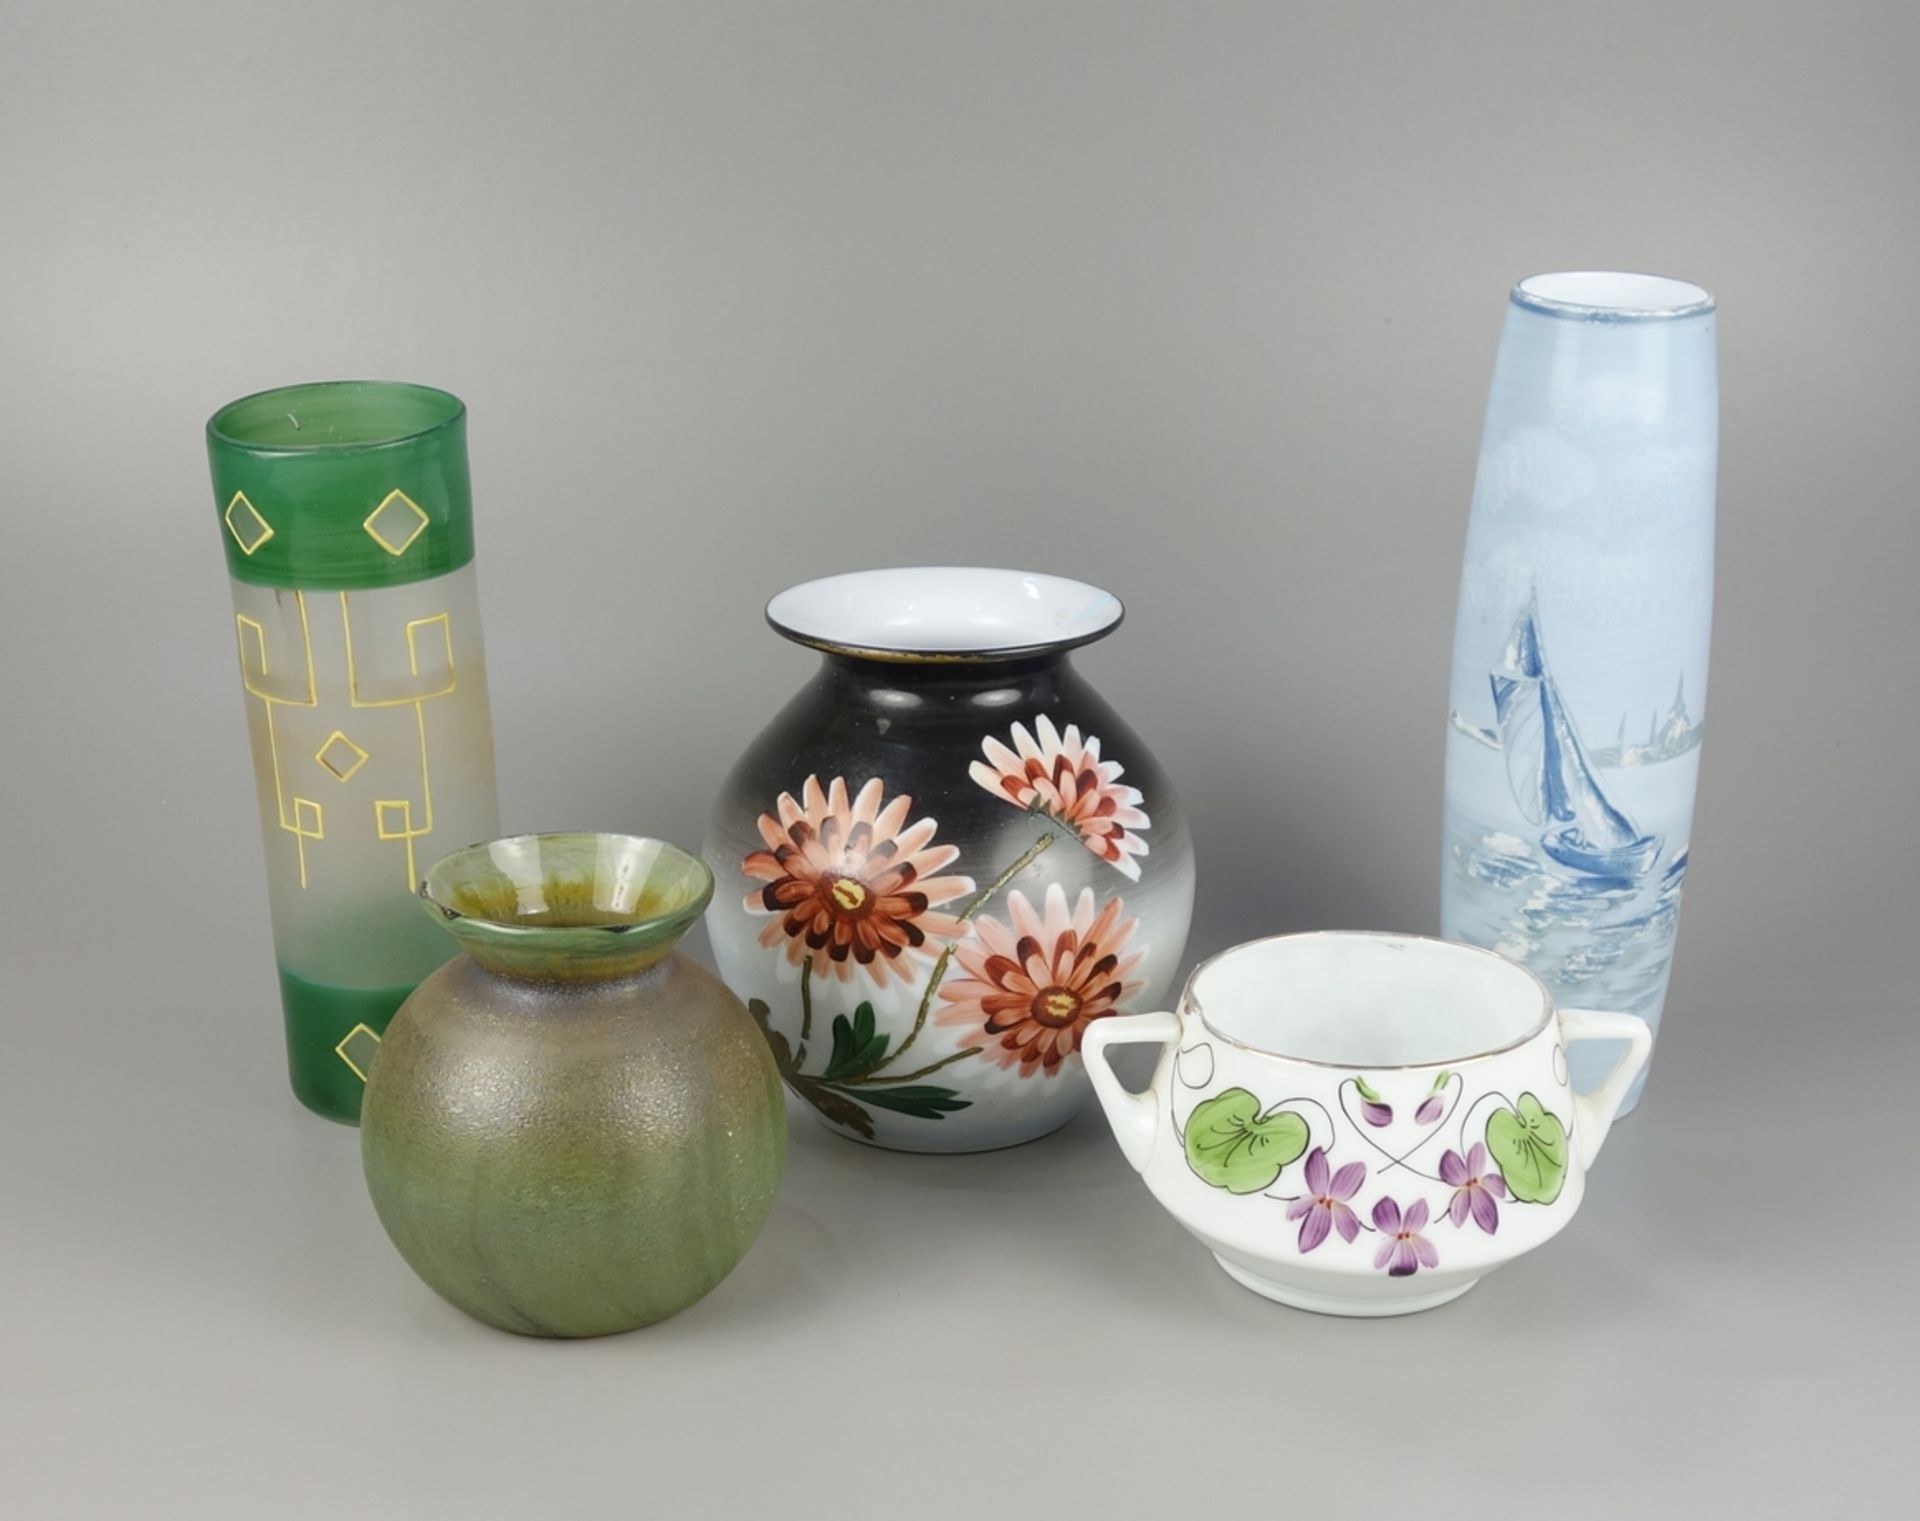 4 vases and 1 bowl, mostly with hand painting, around 1930/1940